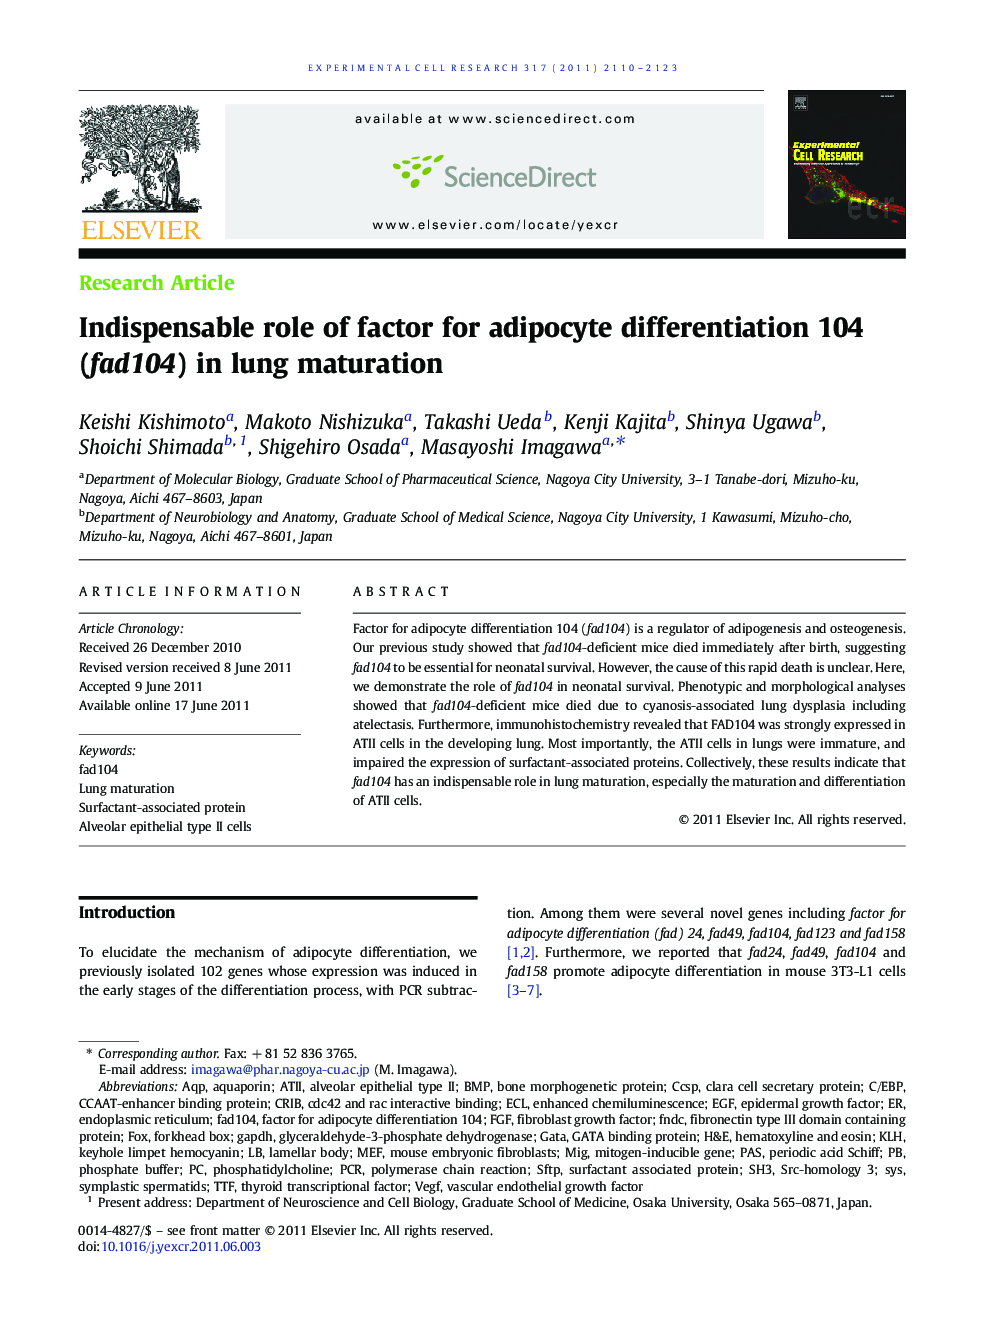 Indispensable role of factor for adipocyte differentiation 104 (fad104) in lung maturation